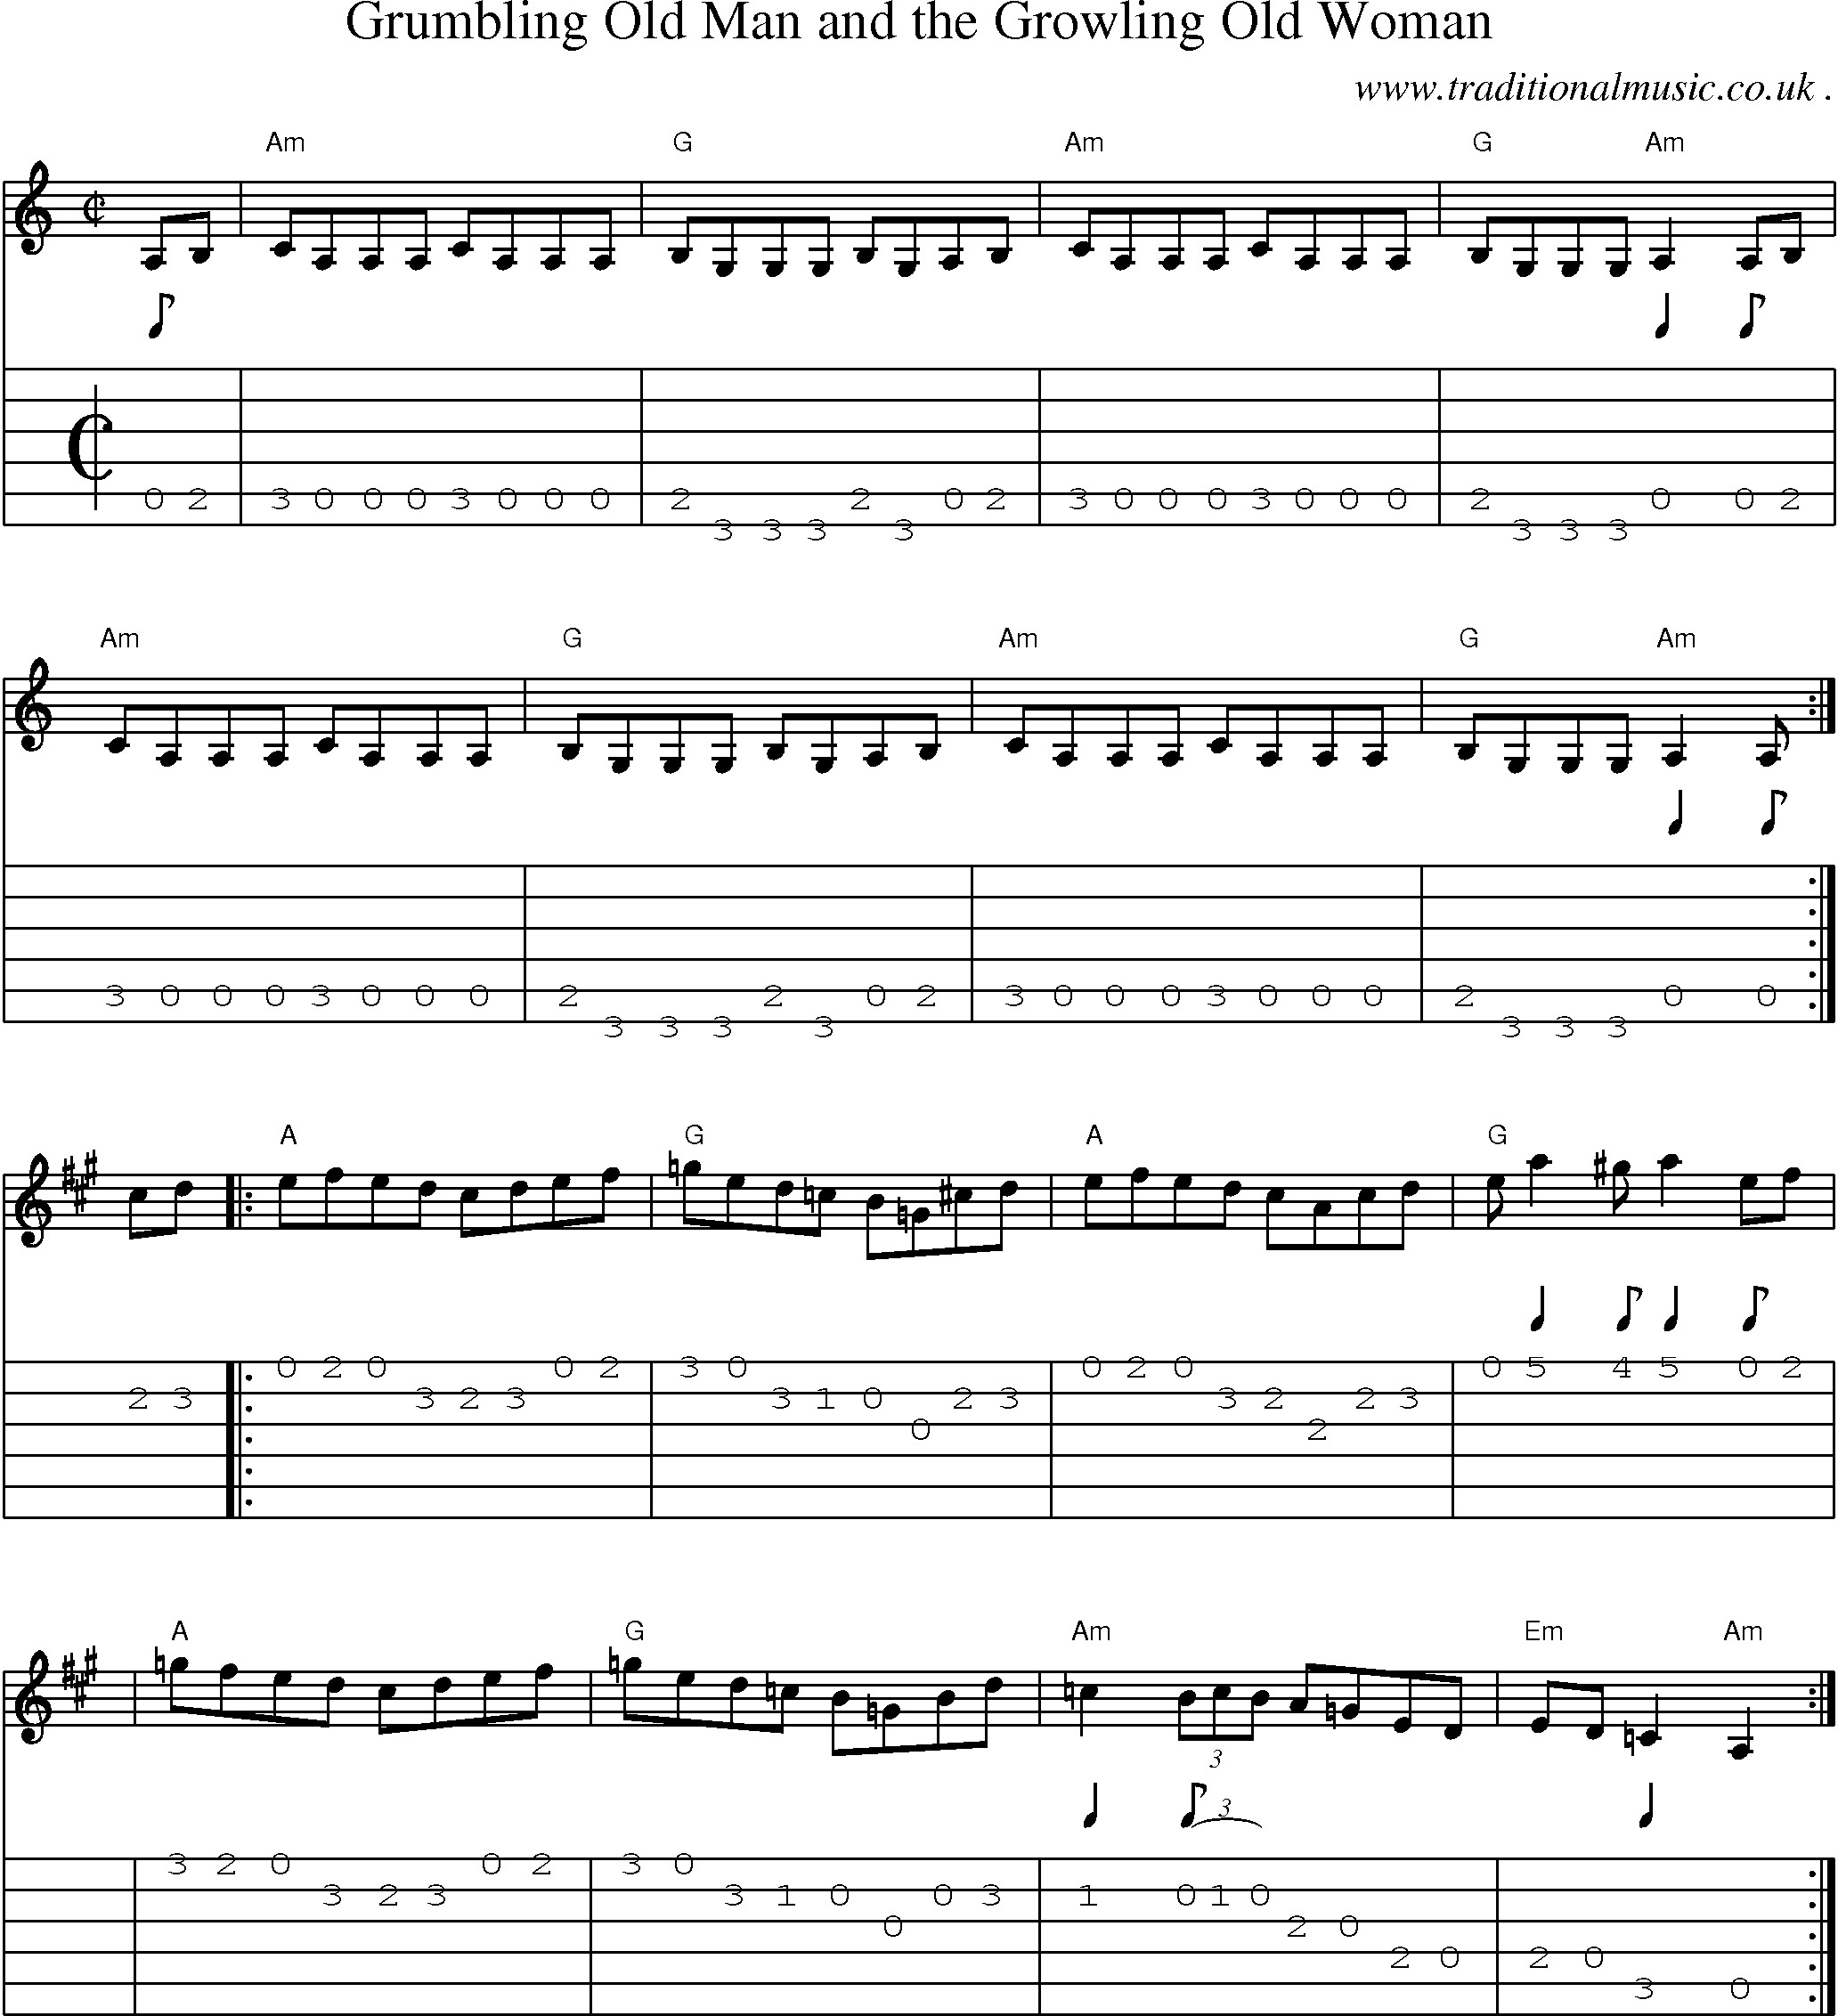 Music Score and Guitar Tabs for Grumbling Old Man And The Growling Old Woman